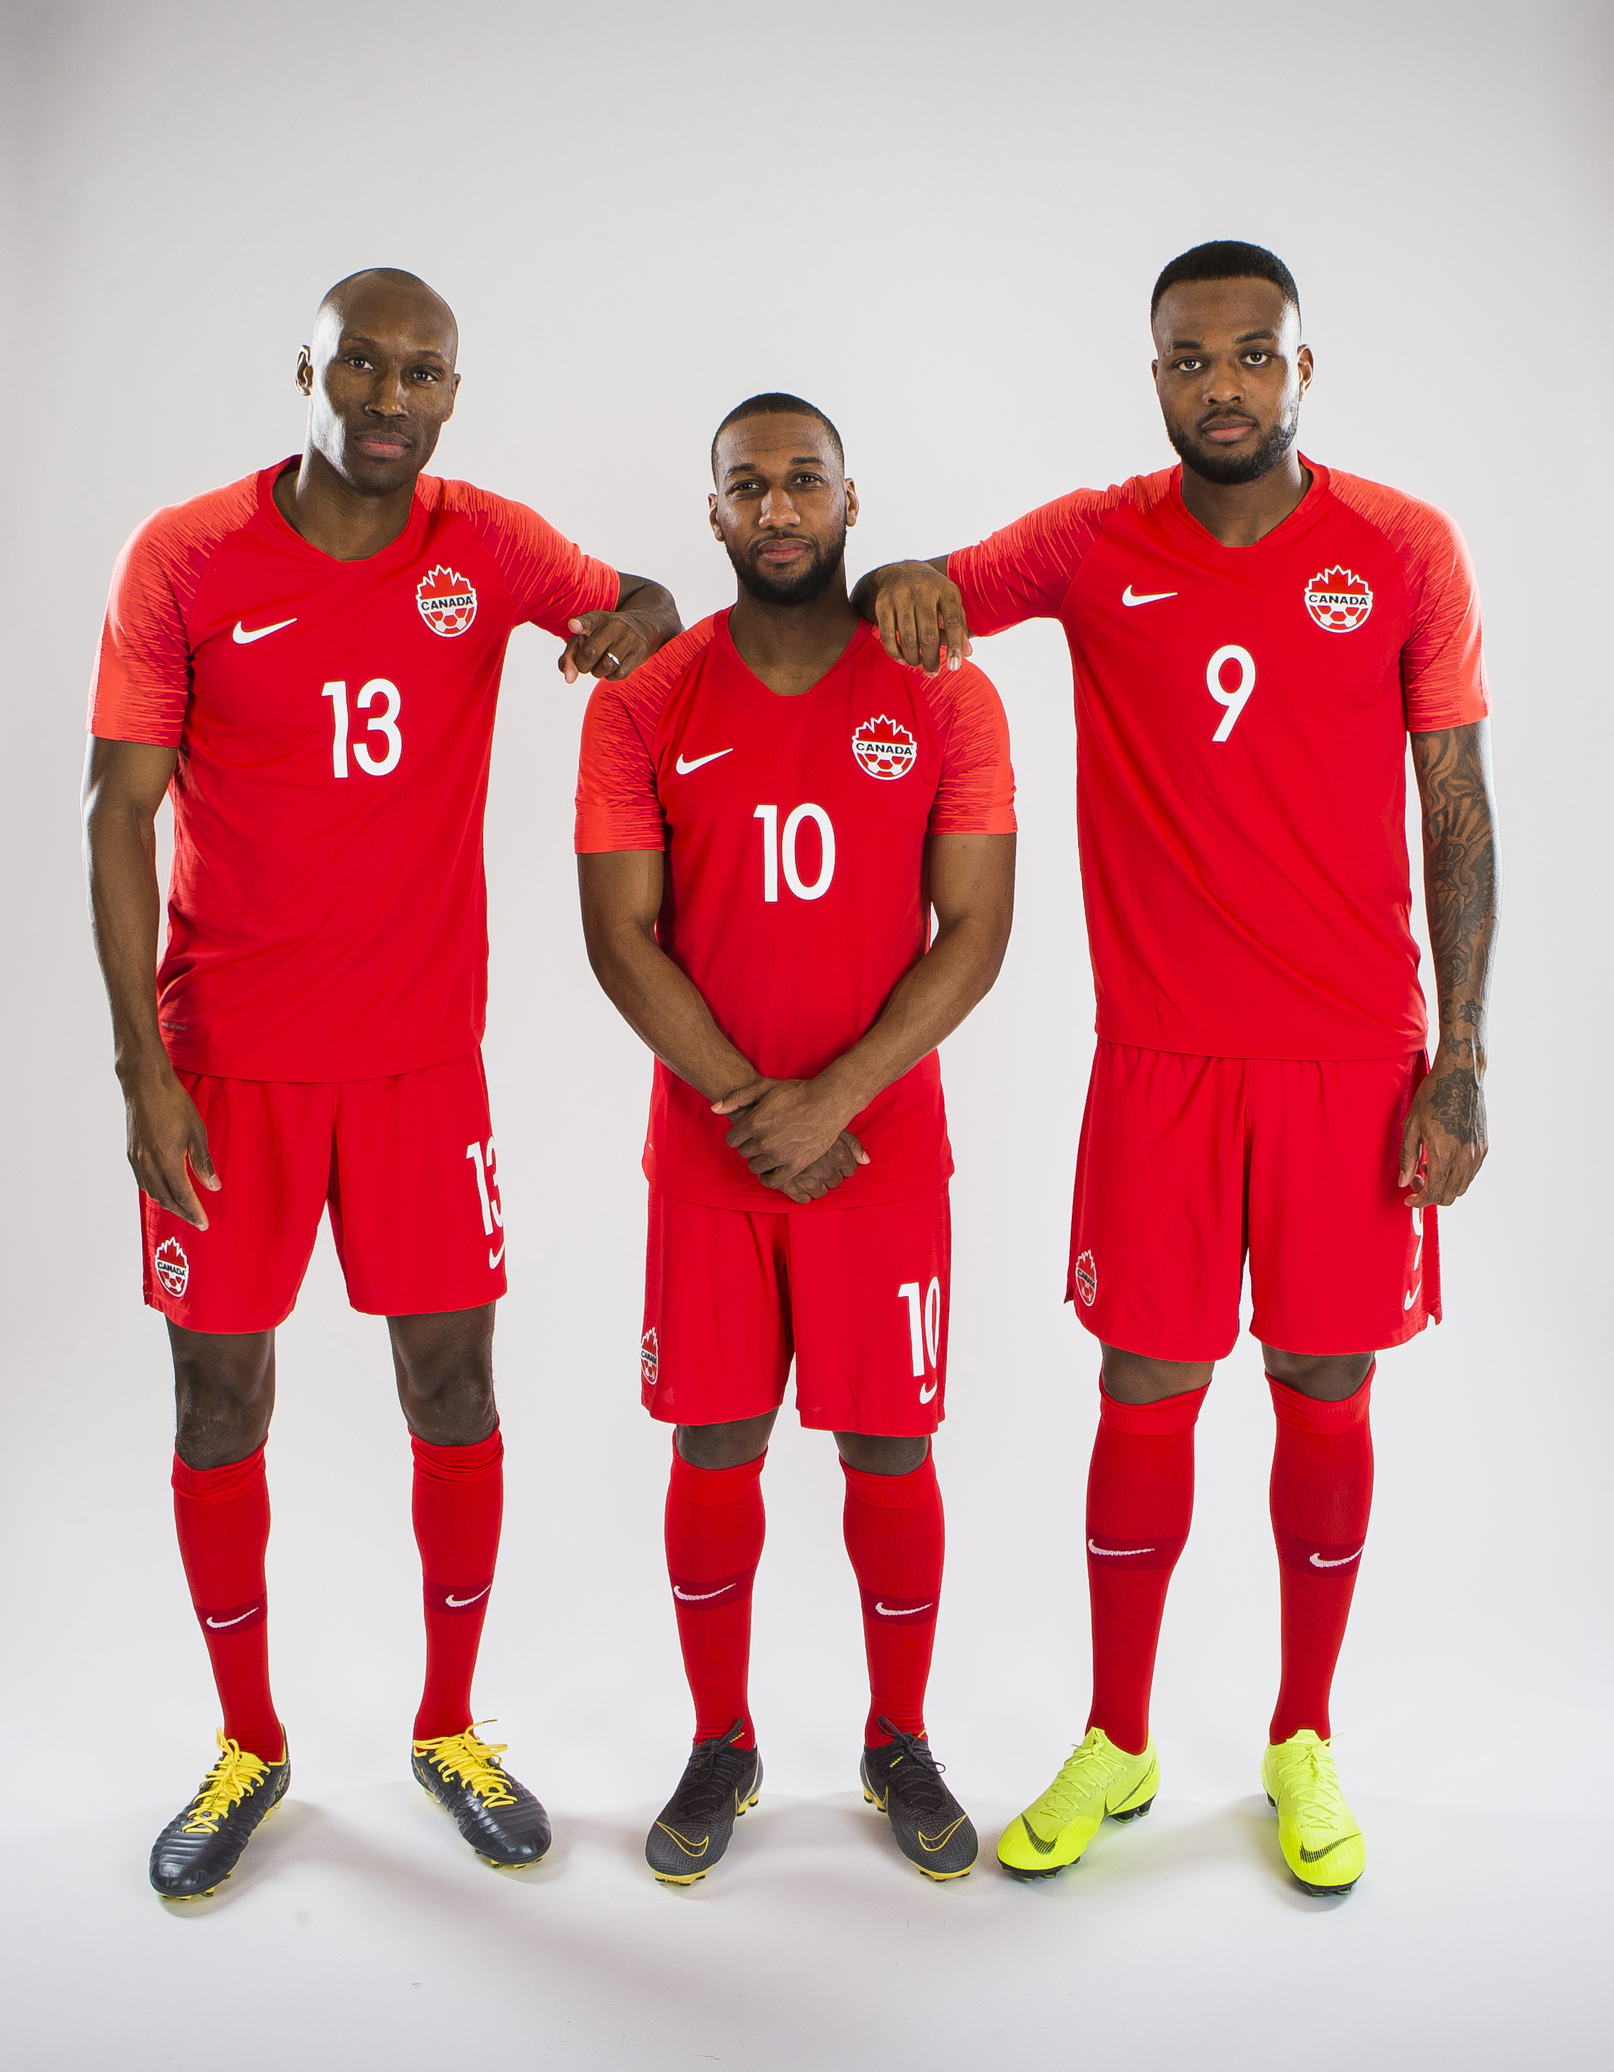 20190318_CANMNT_byFrid10